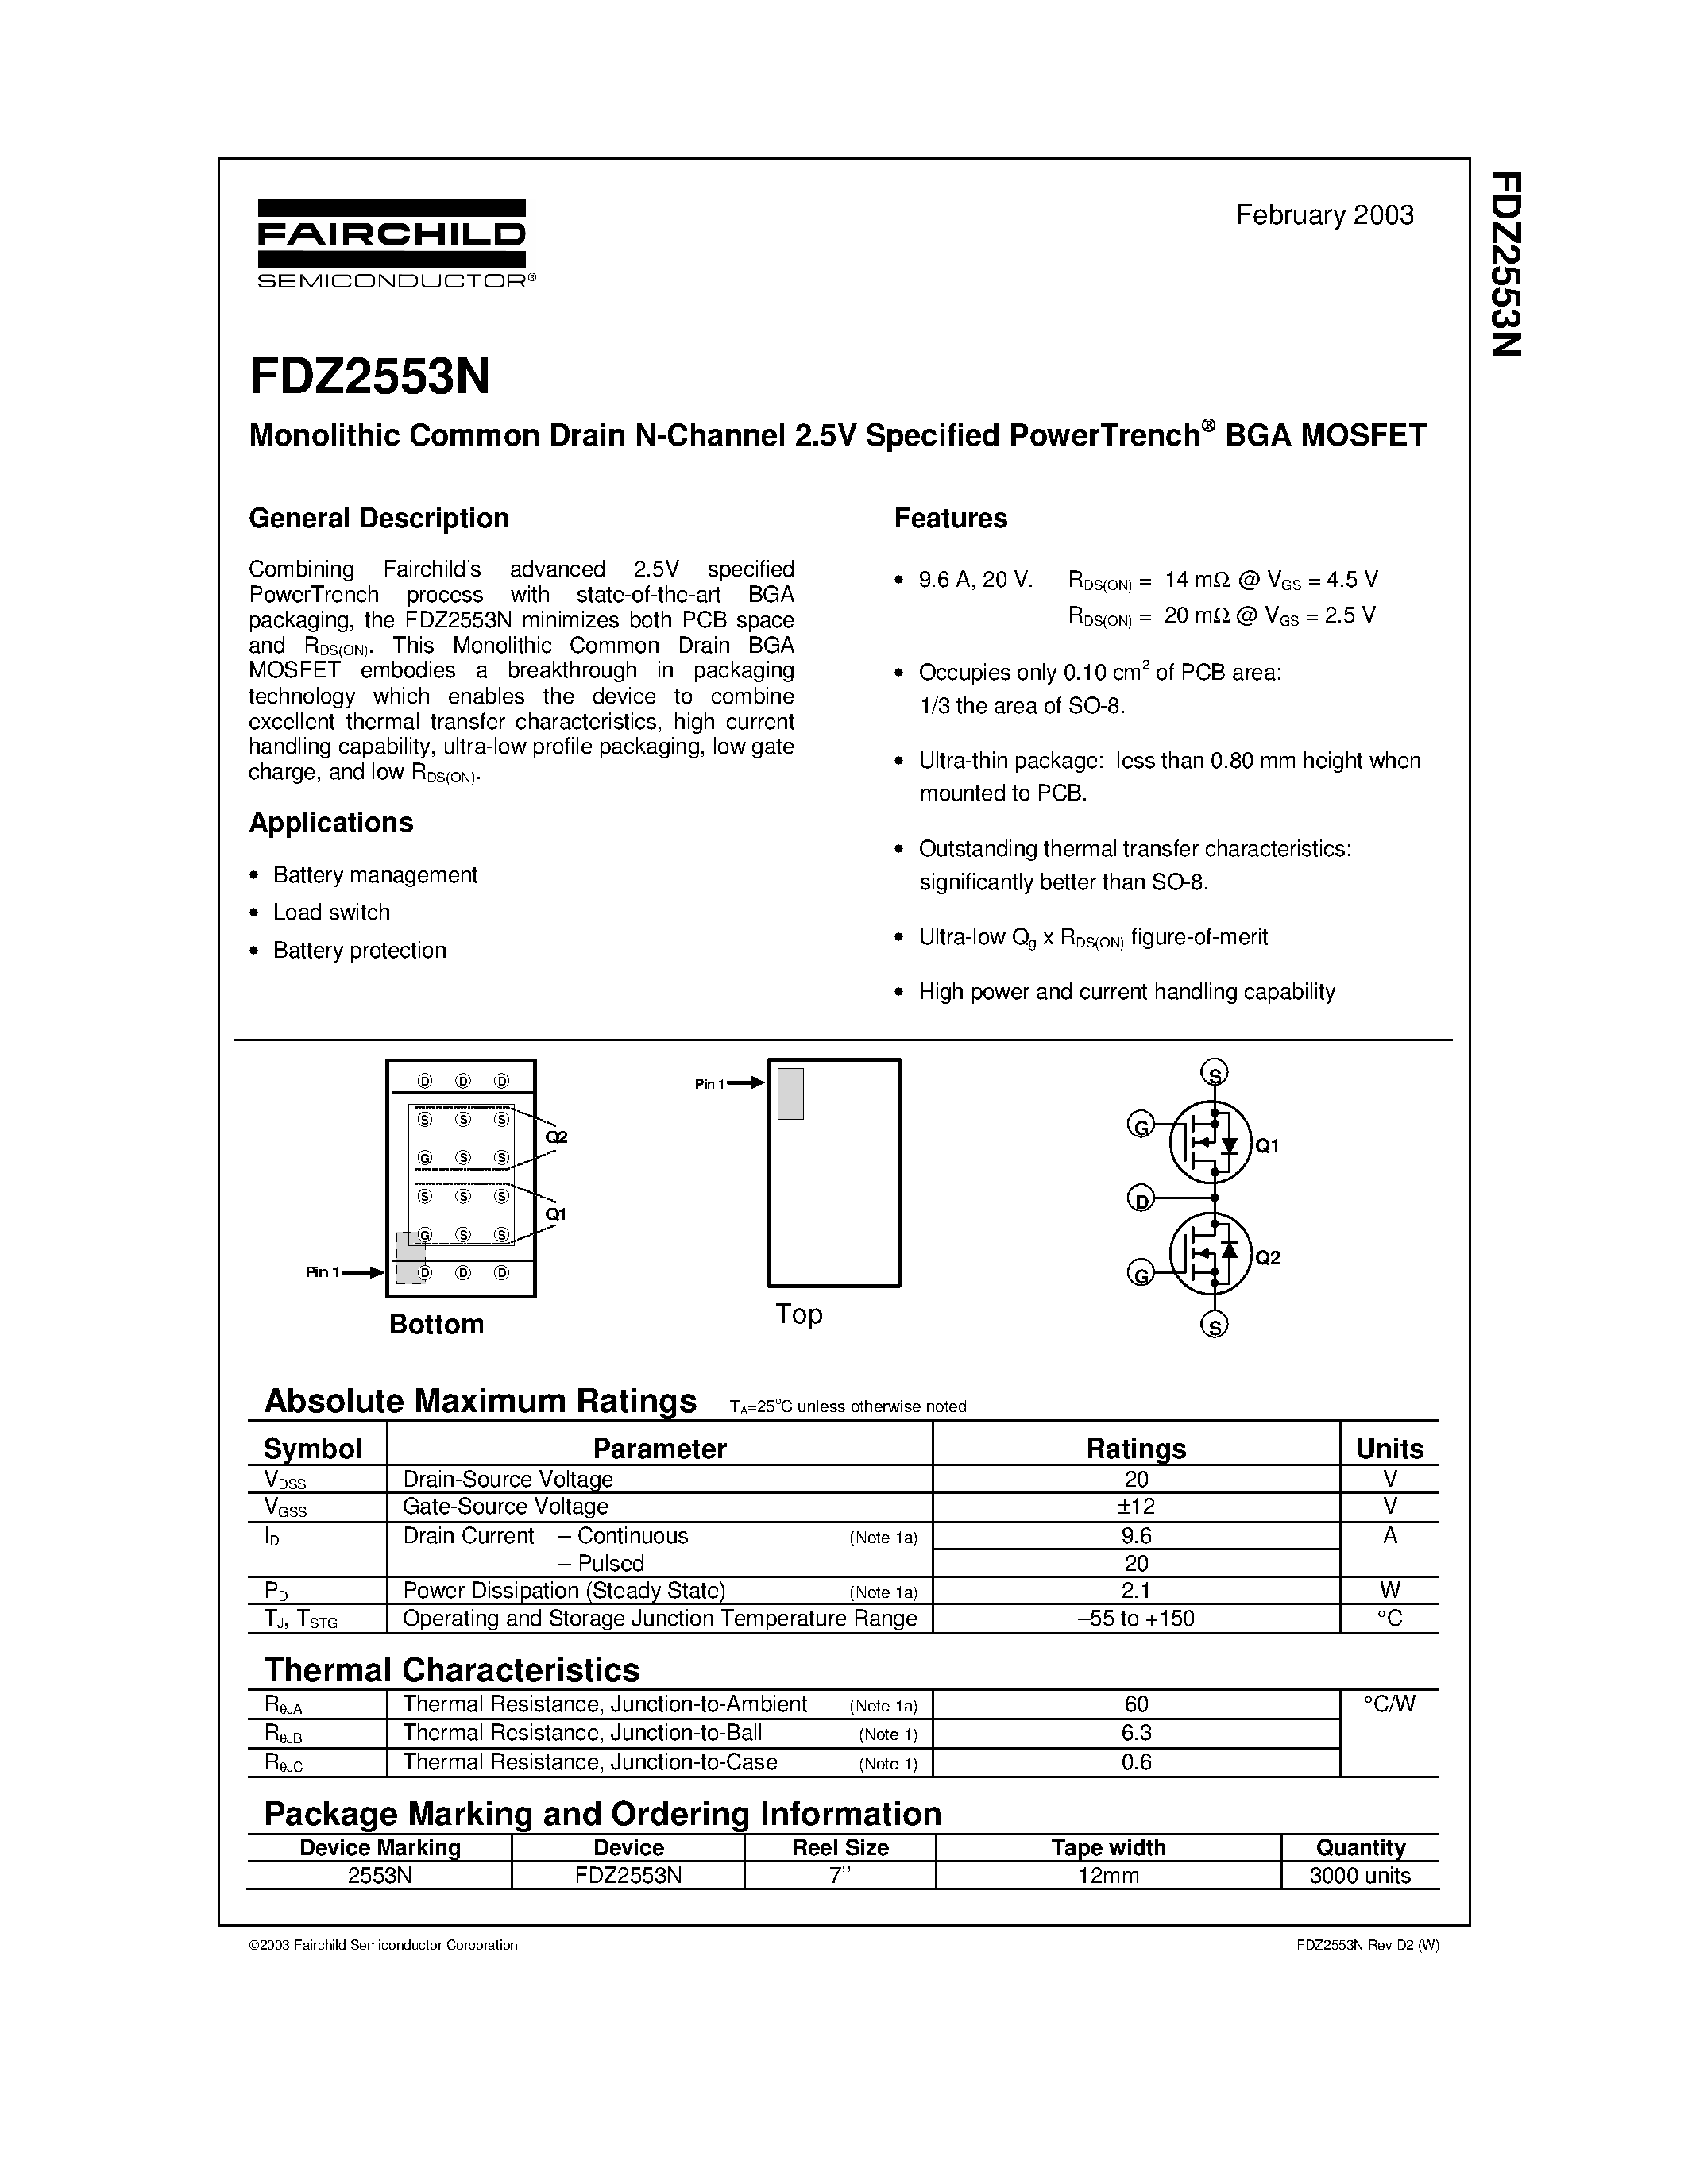 Даташит FDZ2553N - Monolithic Common Drain N-Channel 2.5V Specified PowerTrench страница 1